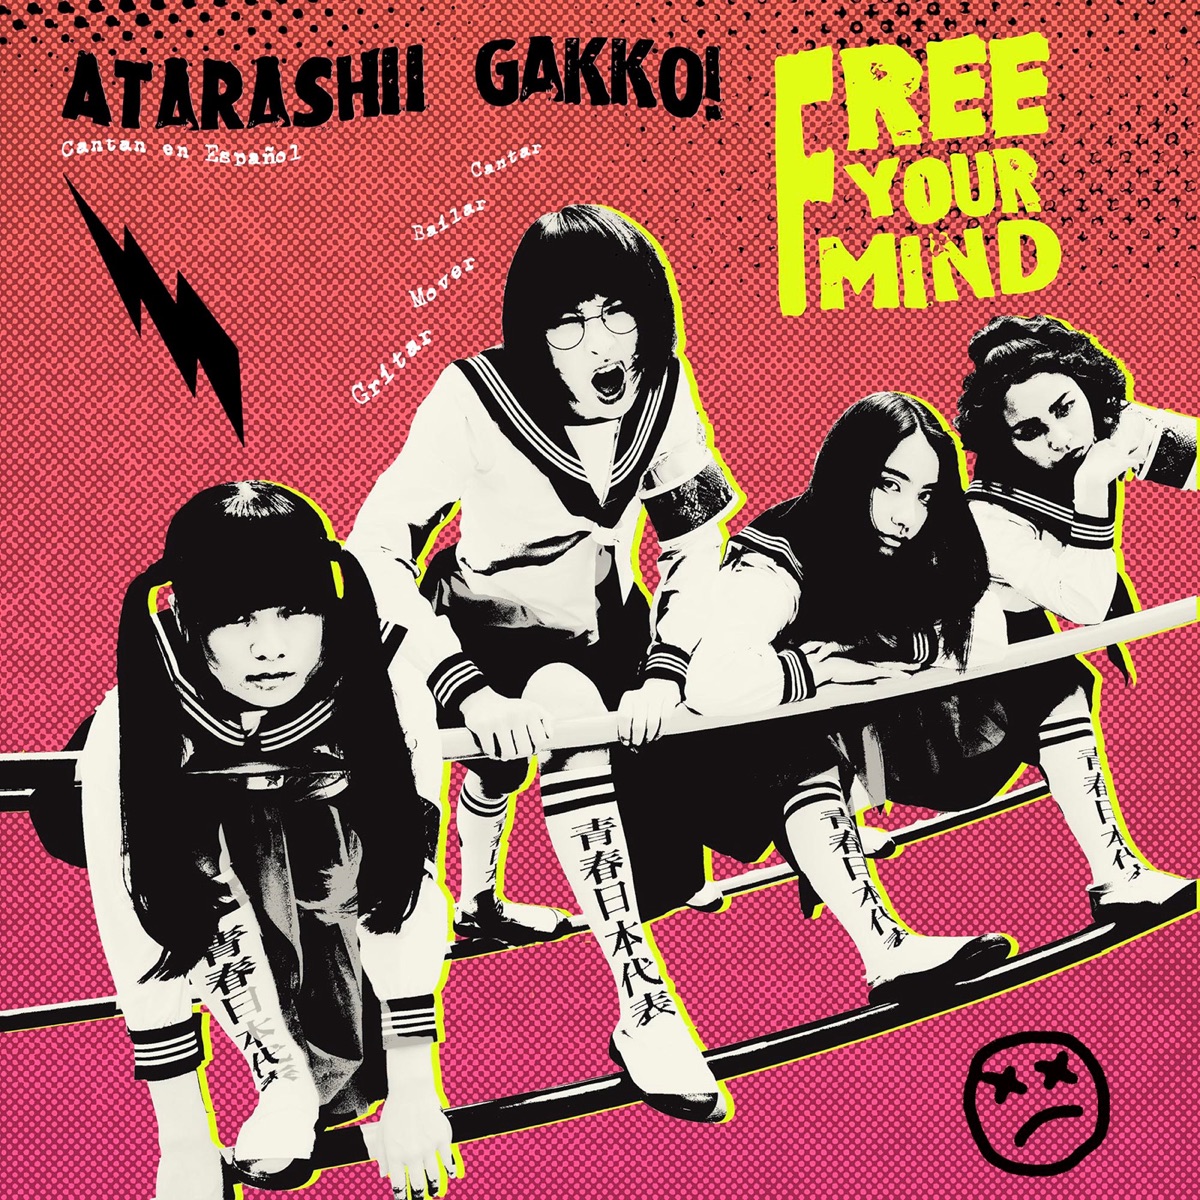 Cover art for『ATARASHII GAKKO! - Free Your Mind (Spanish Version)』from the release『Free Your Mind (Spanish Version)』